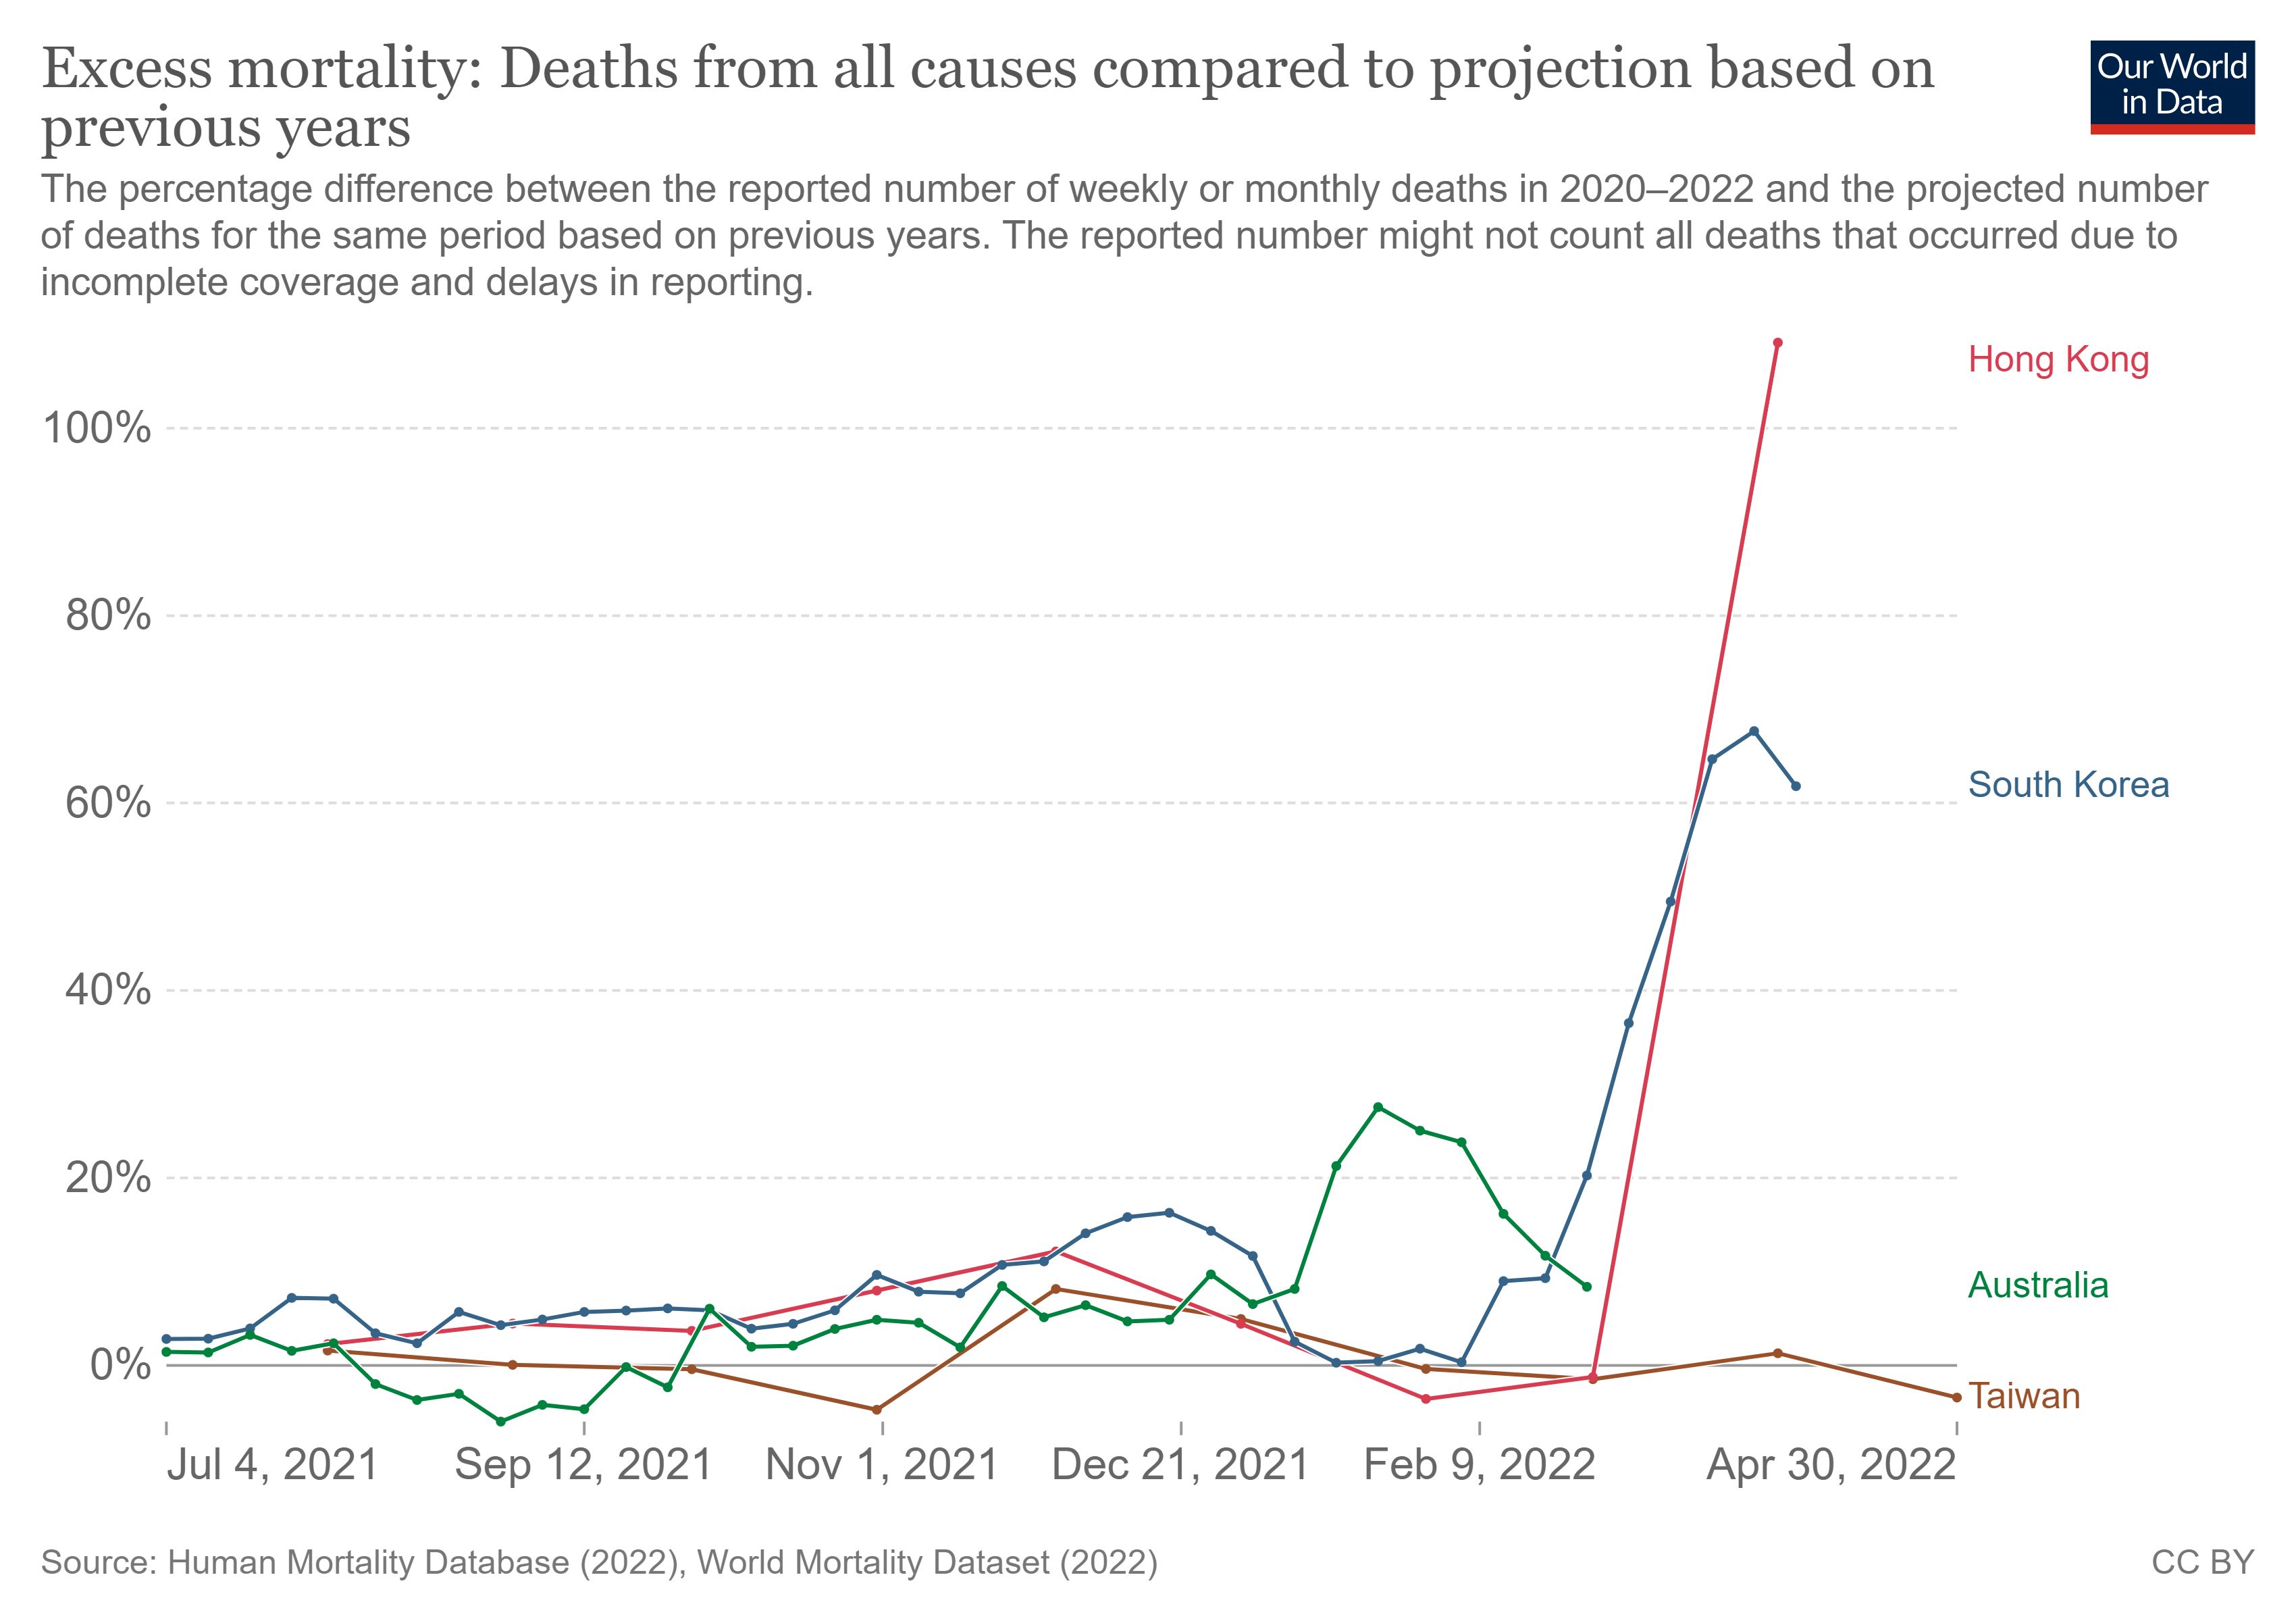 Excess deaths in Australia are up by a lot